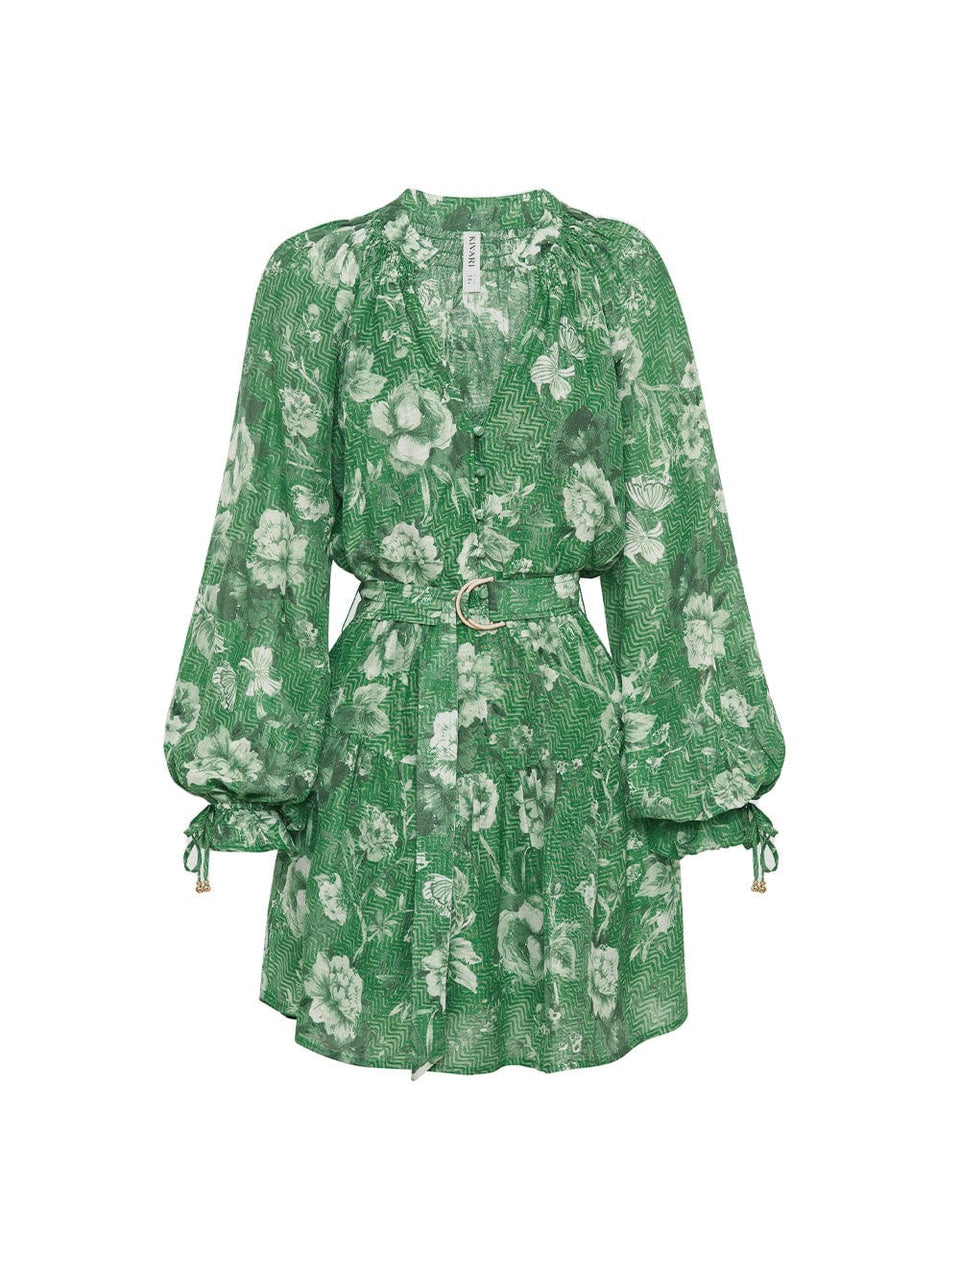 Ghost image of KIVARI Khalo Mini Dress: A green floral dress featuring a button-through bodice, full-length blouson sleeves and a tiered skirt with belt. 